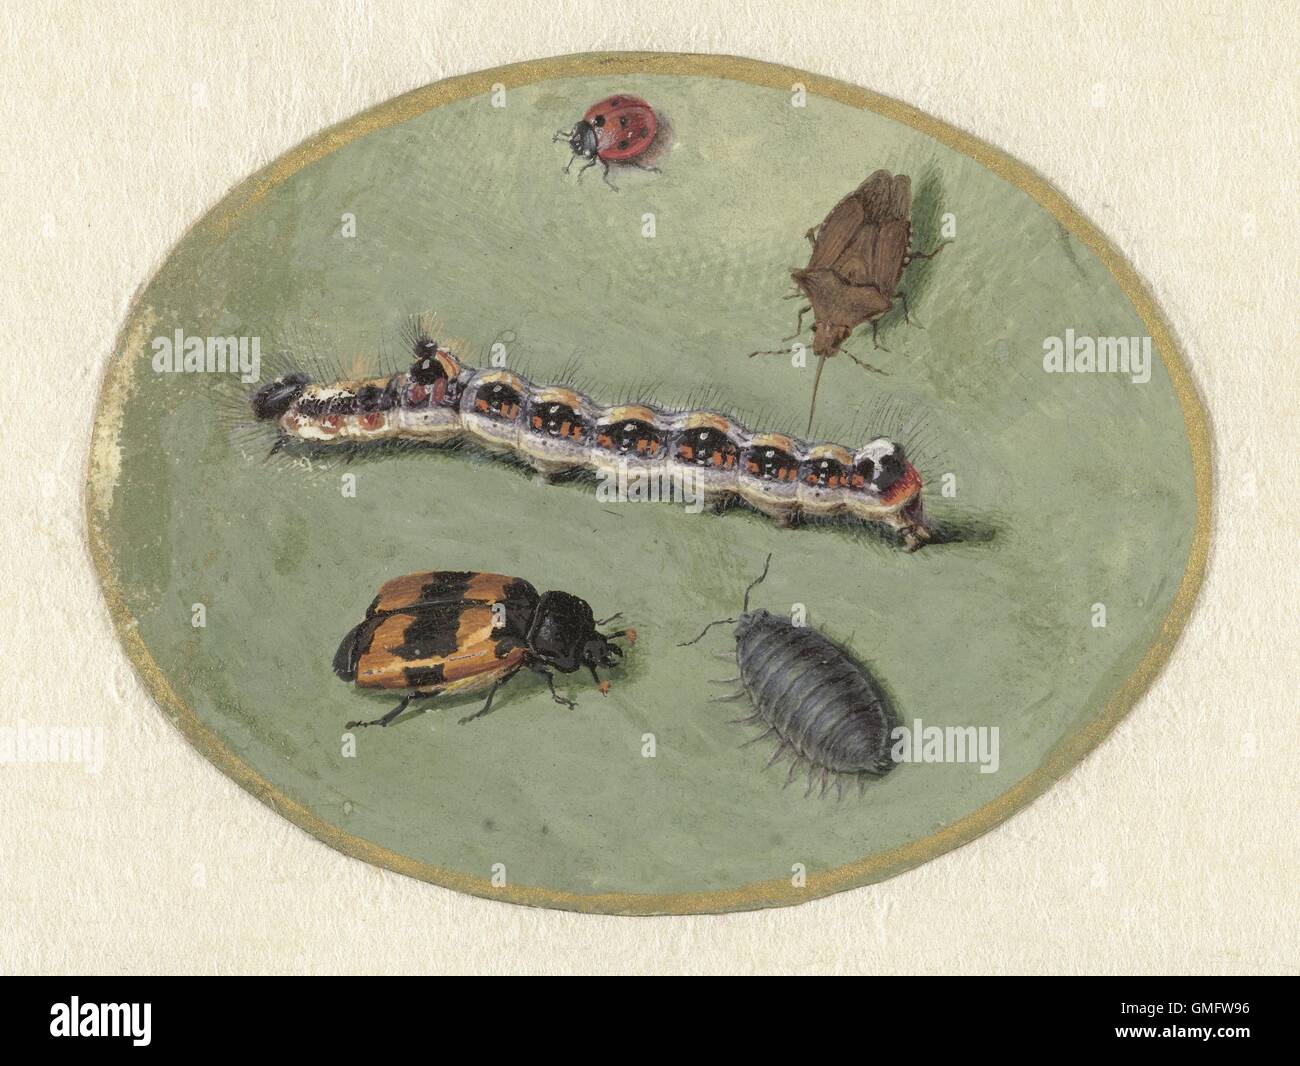 Ladybird, Caterpillar, Sow Bug and Two Turrets, by Jan Augustin van der Goes, 1690-1700. (BSLOC 2016 1 254) Stock Photo